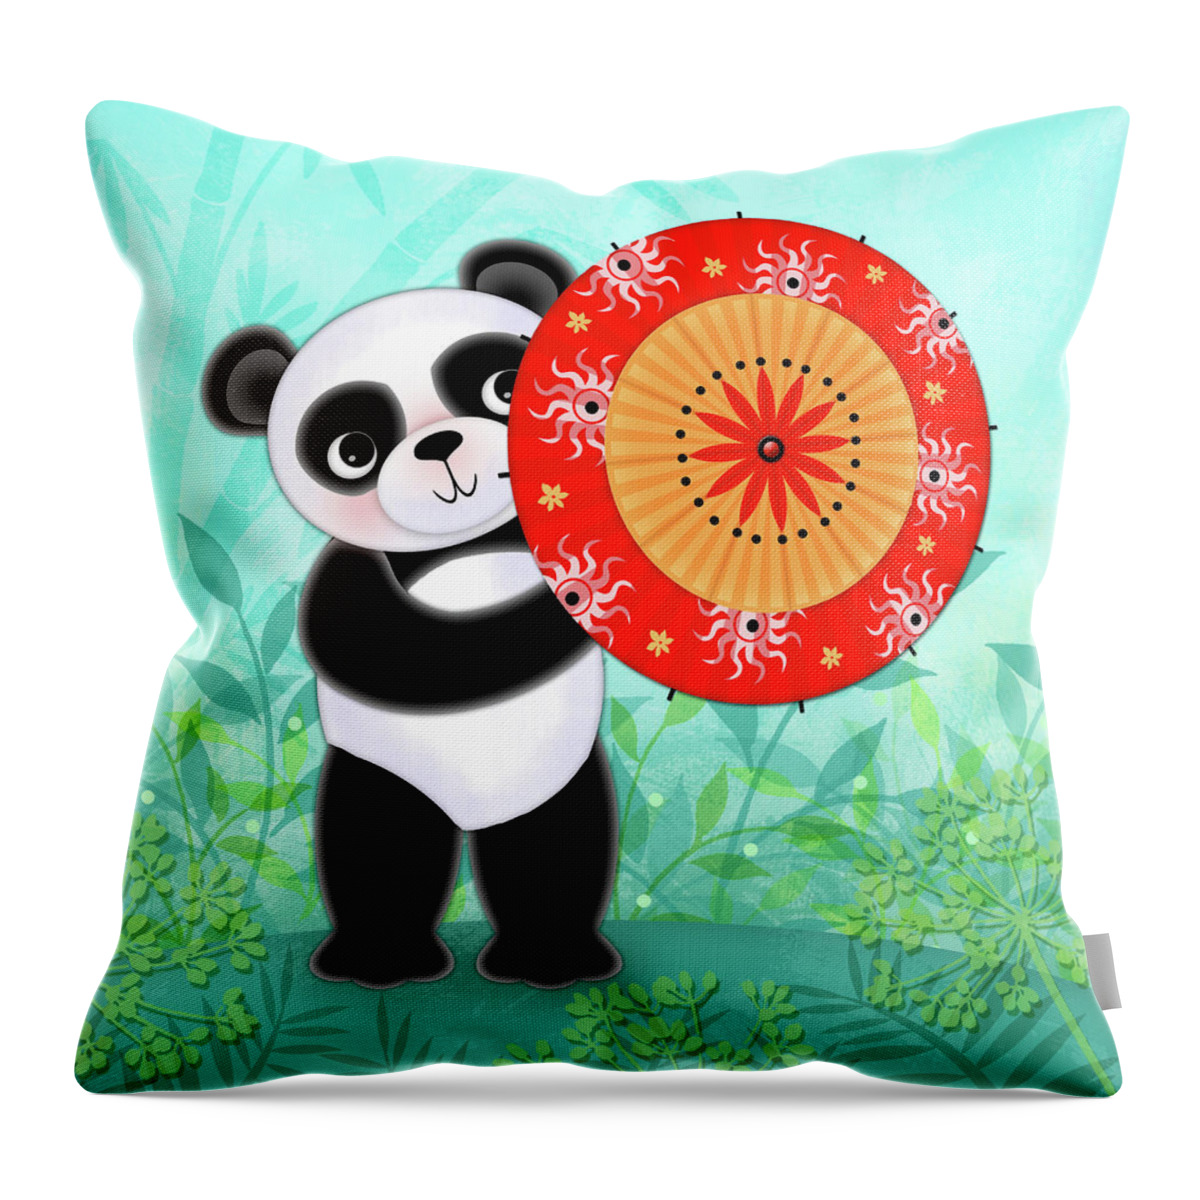 Letter P Throw Pillow featuring the digital art P is for Panda and Parasol by Valerie Drake Lesiak